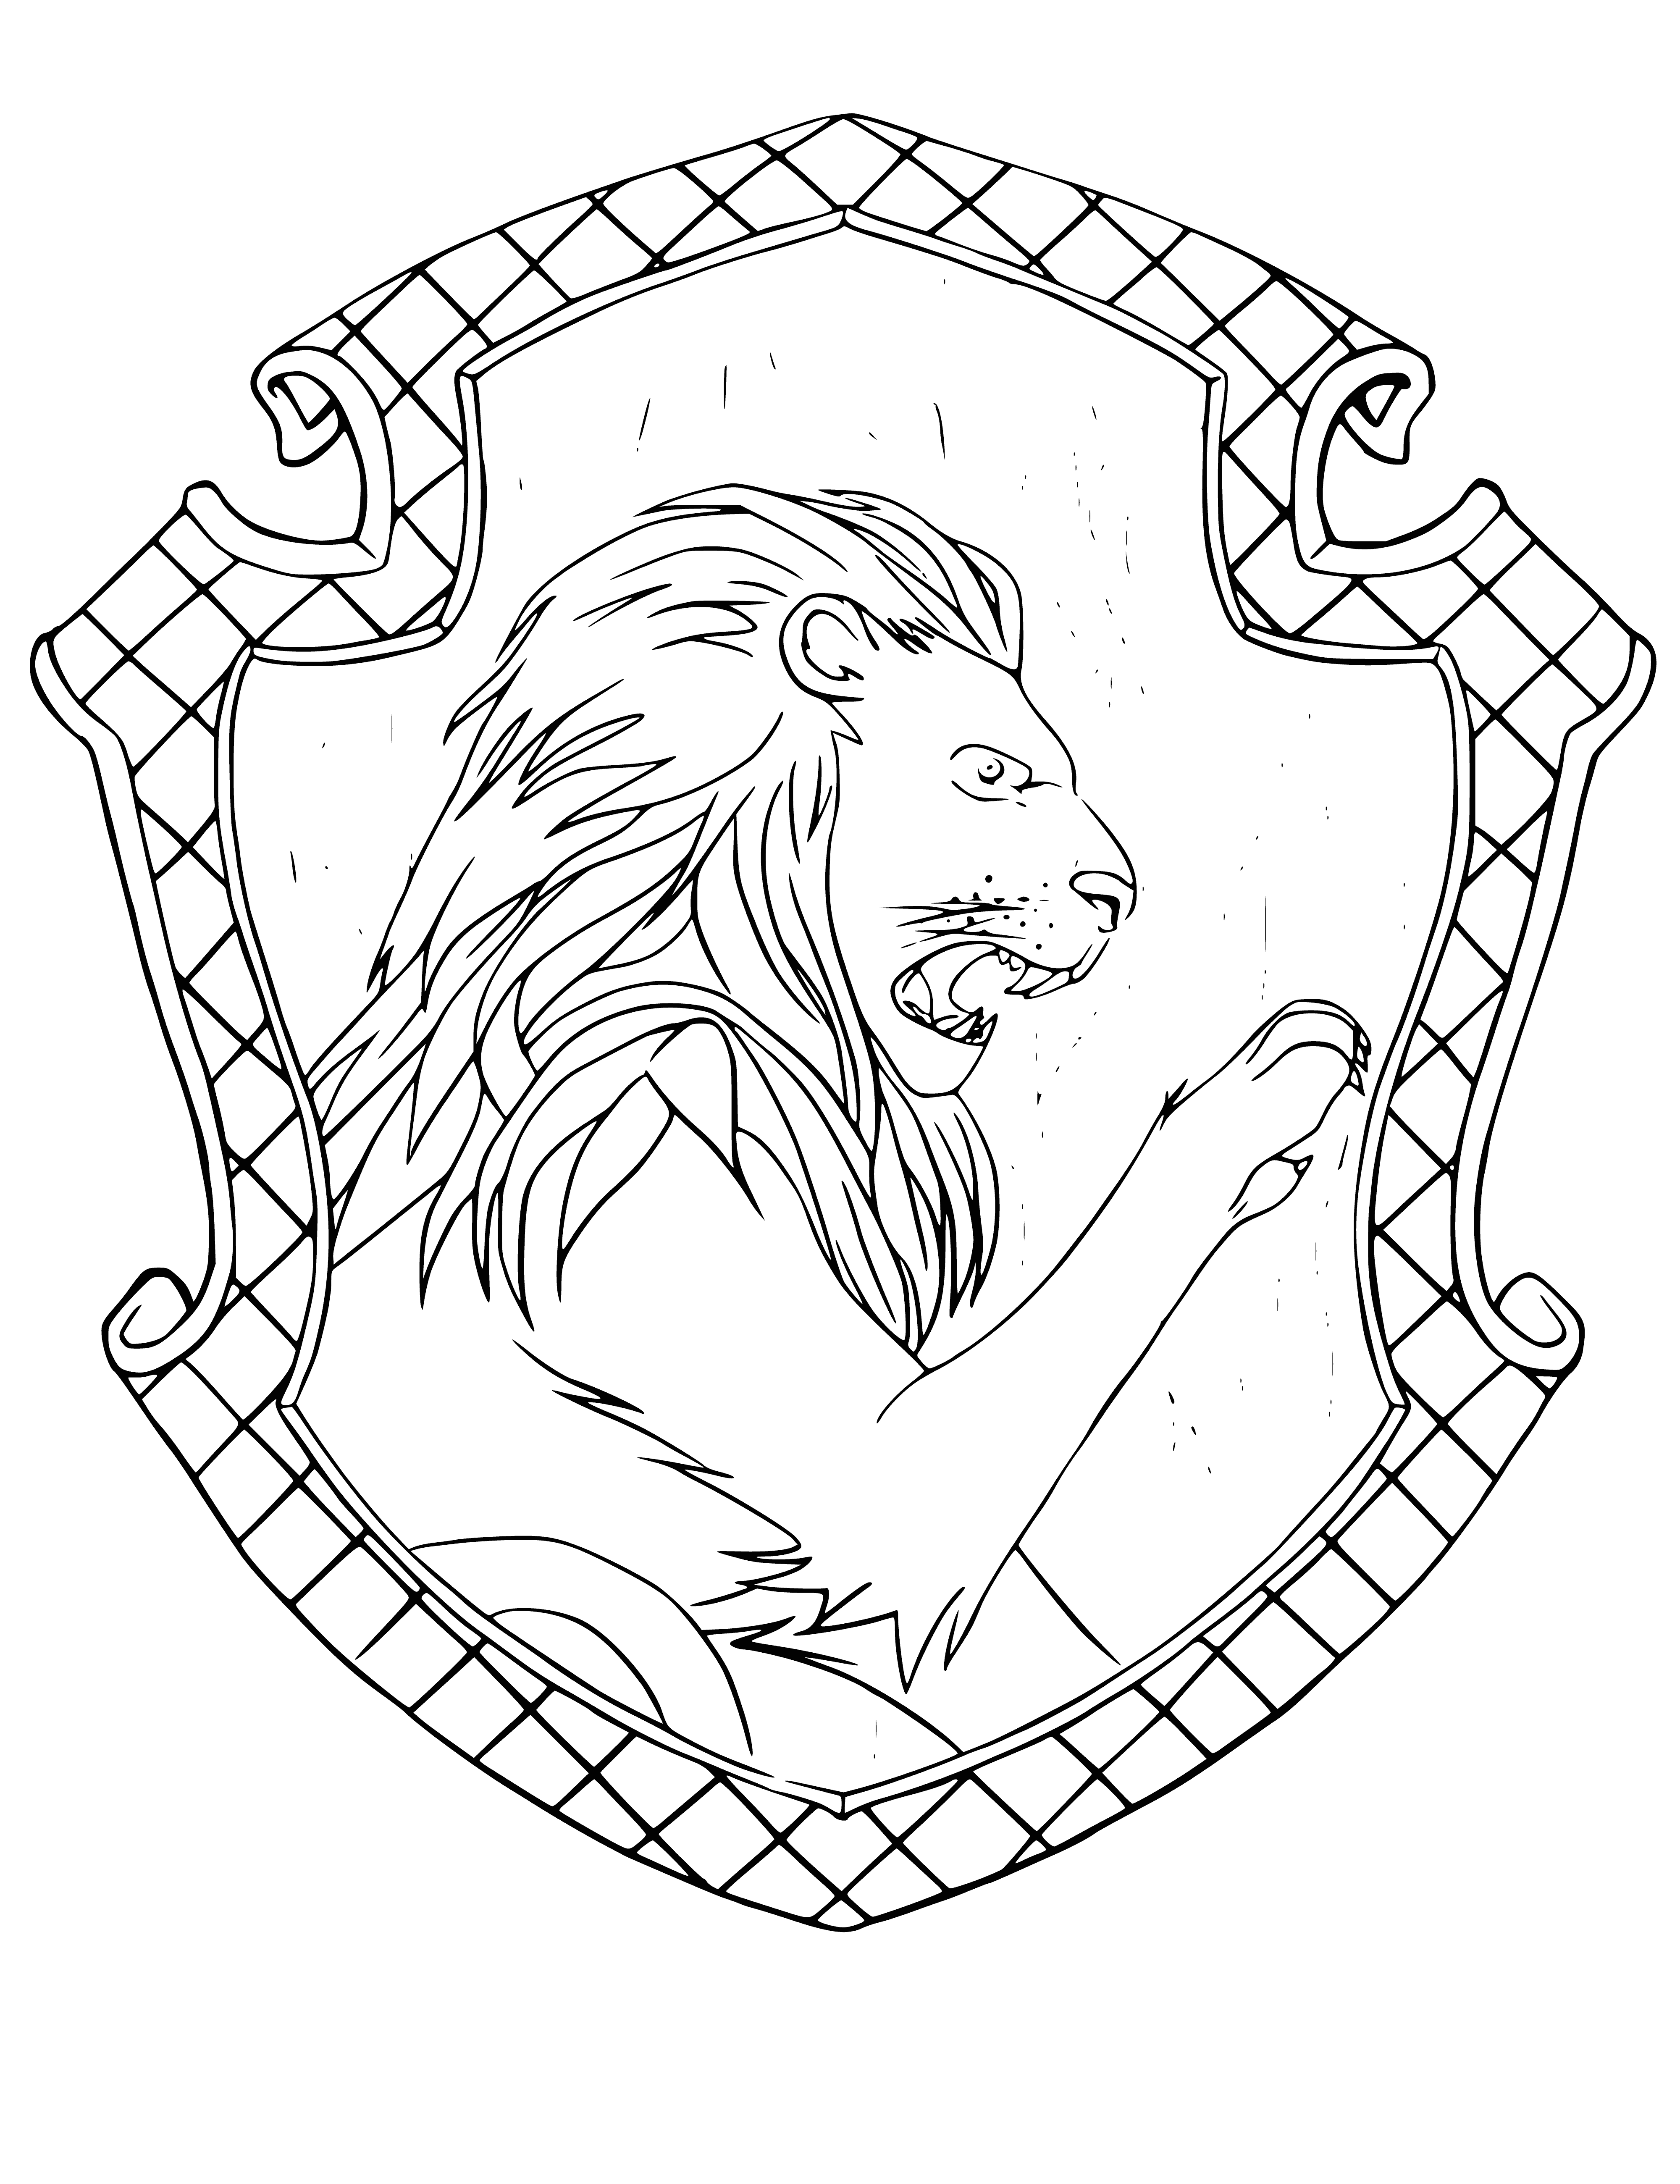 coloring page: Emblem of Gryffindor House is a lion in pounce position atop a wizard-emblazoned shield, with four stars above. #HarryPotter